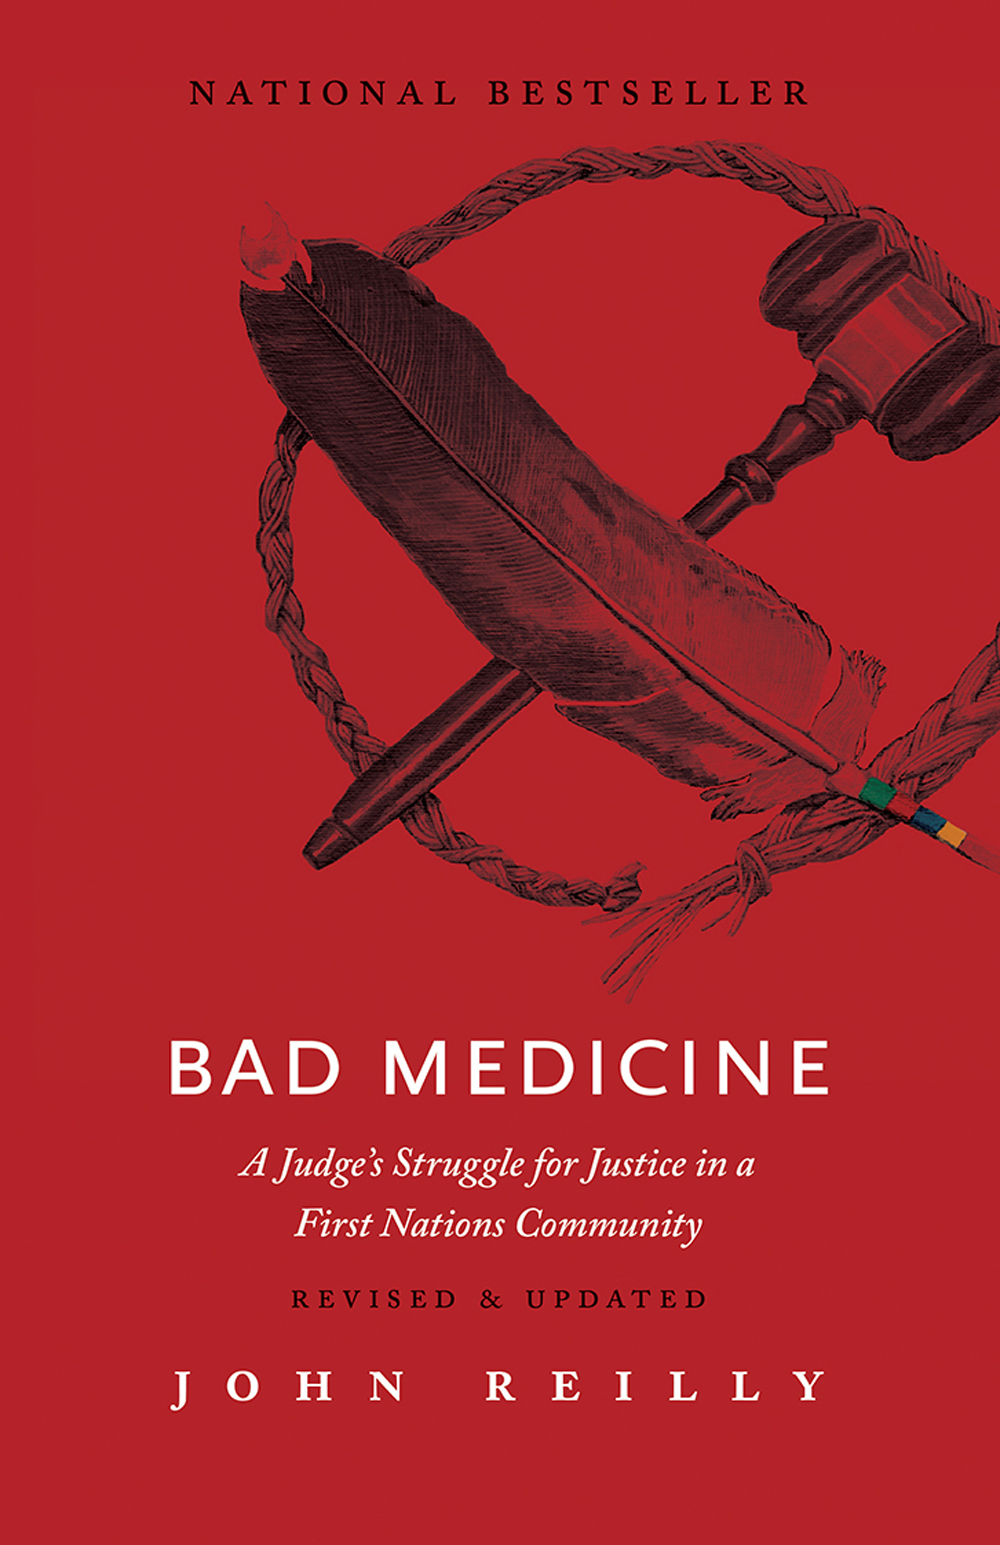 Bad Medicine - Revised & Updated : A Judge’s Struggle for Justice in a First Nations Community – Revised & Updated | Reilly, John